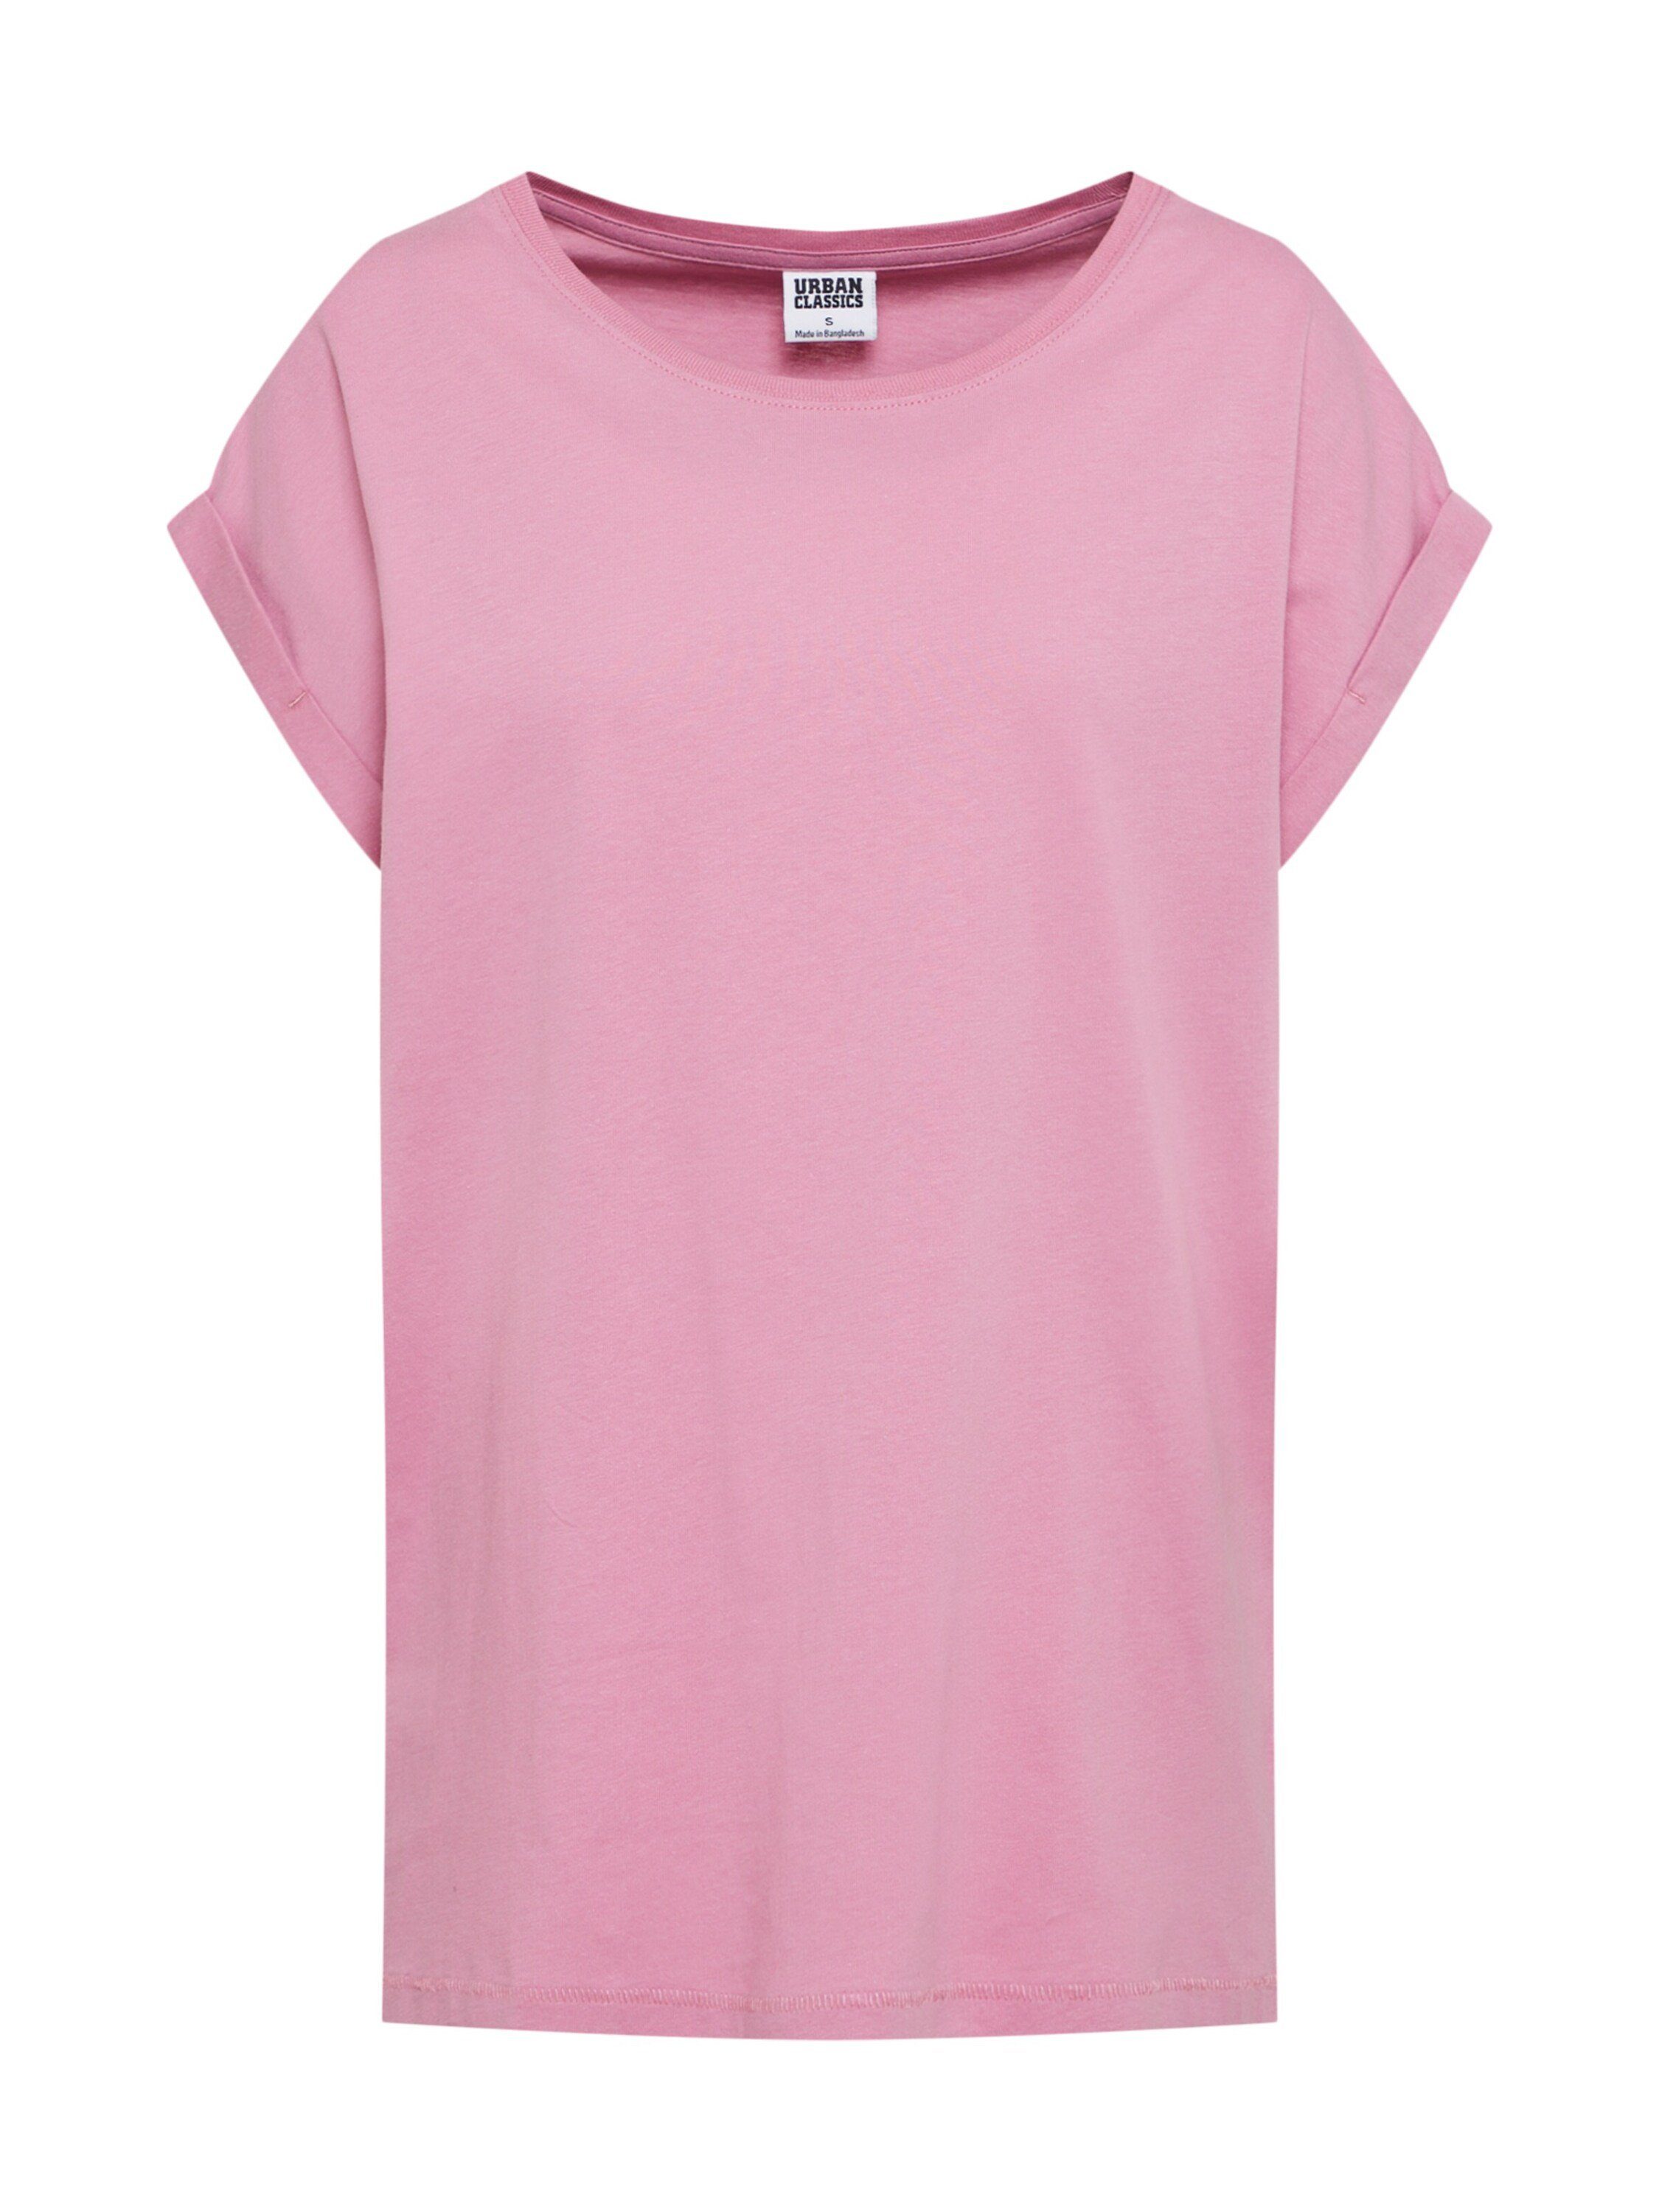 URBAN CLASSICS T-Shirt (1-tlg) Plain/ohne Details, Weiteres Detail TB771 coolpink Extended Shoulder